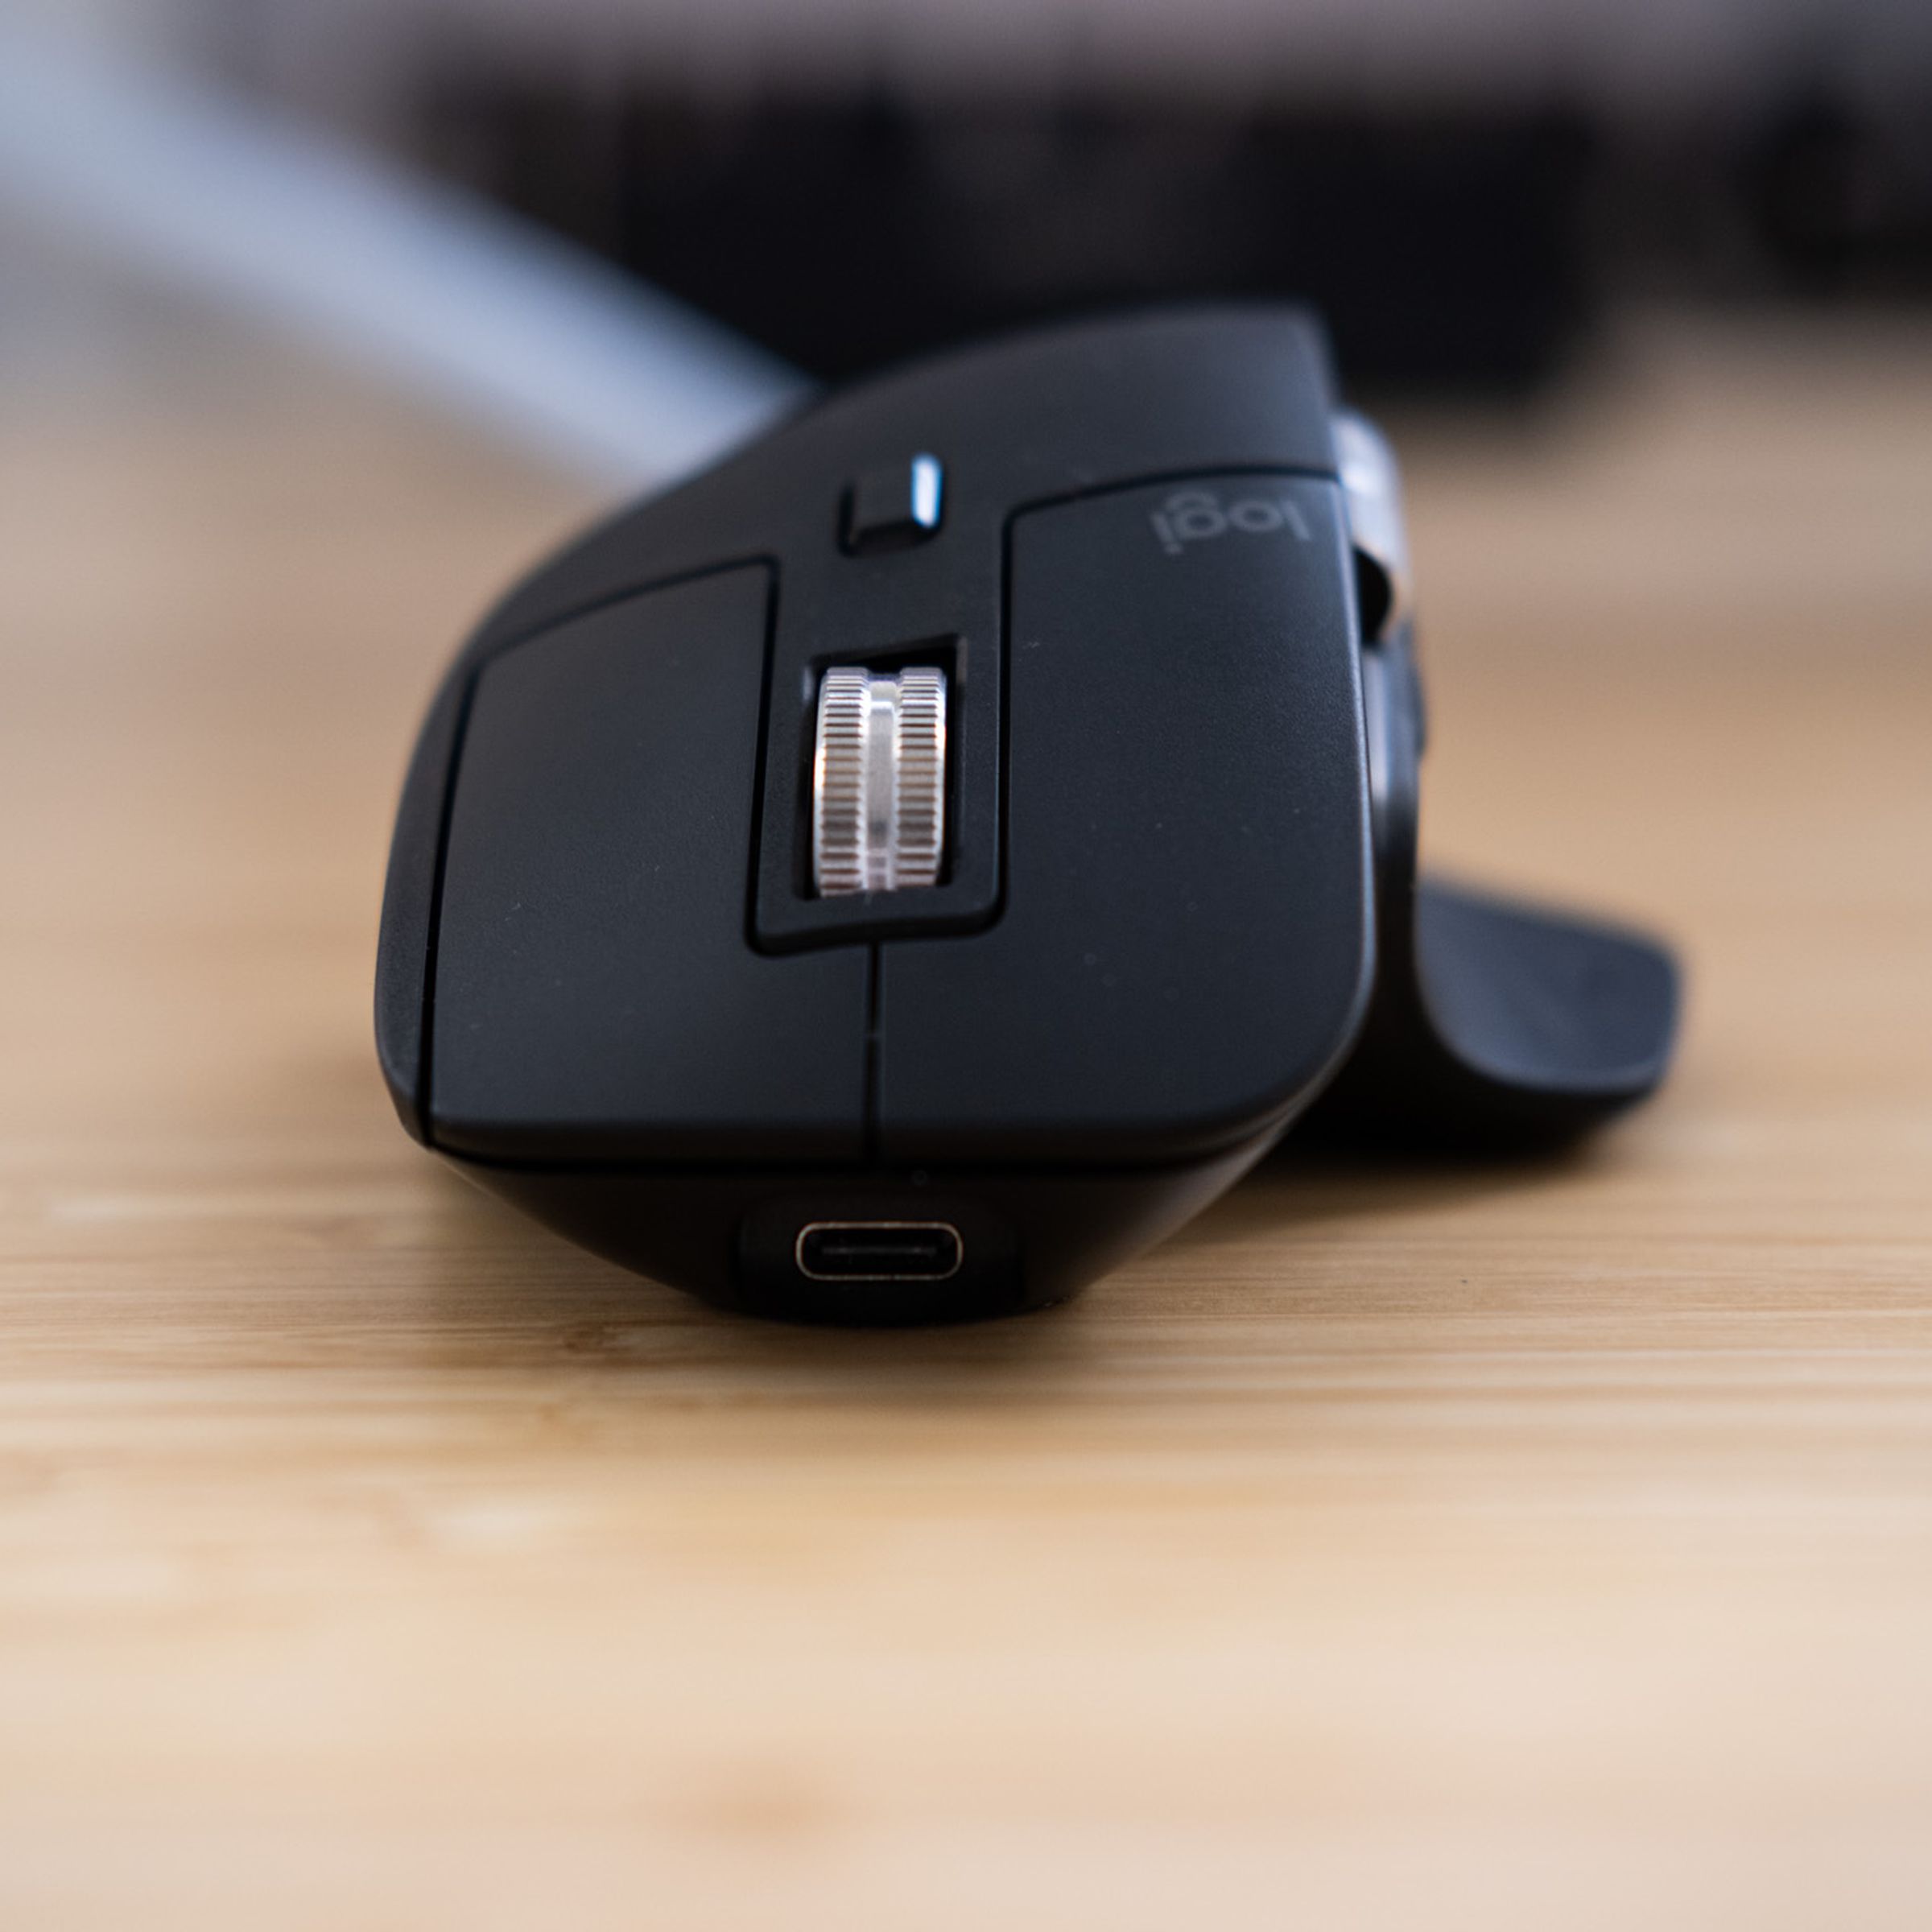 The Logitech MX Master 3S mouse as viewed from the front.